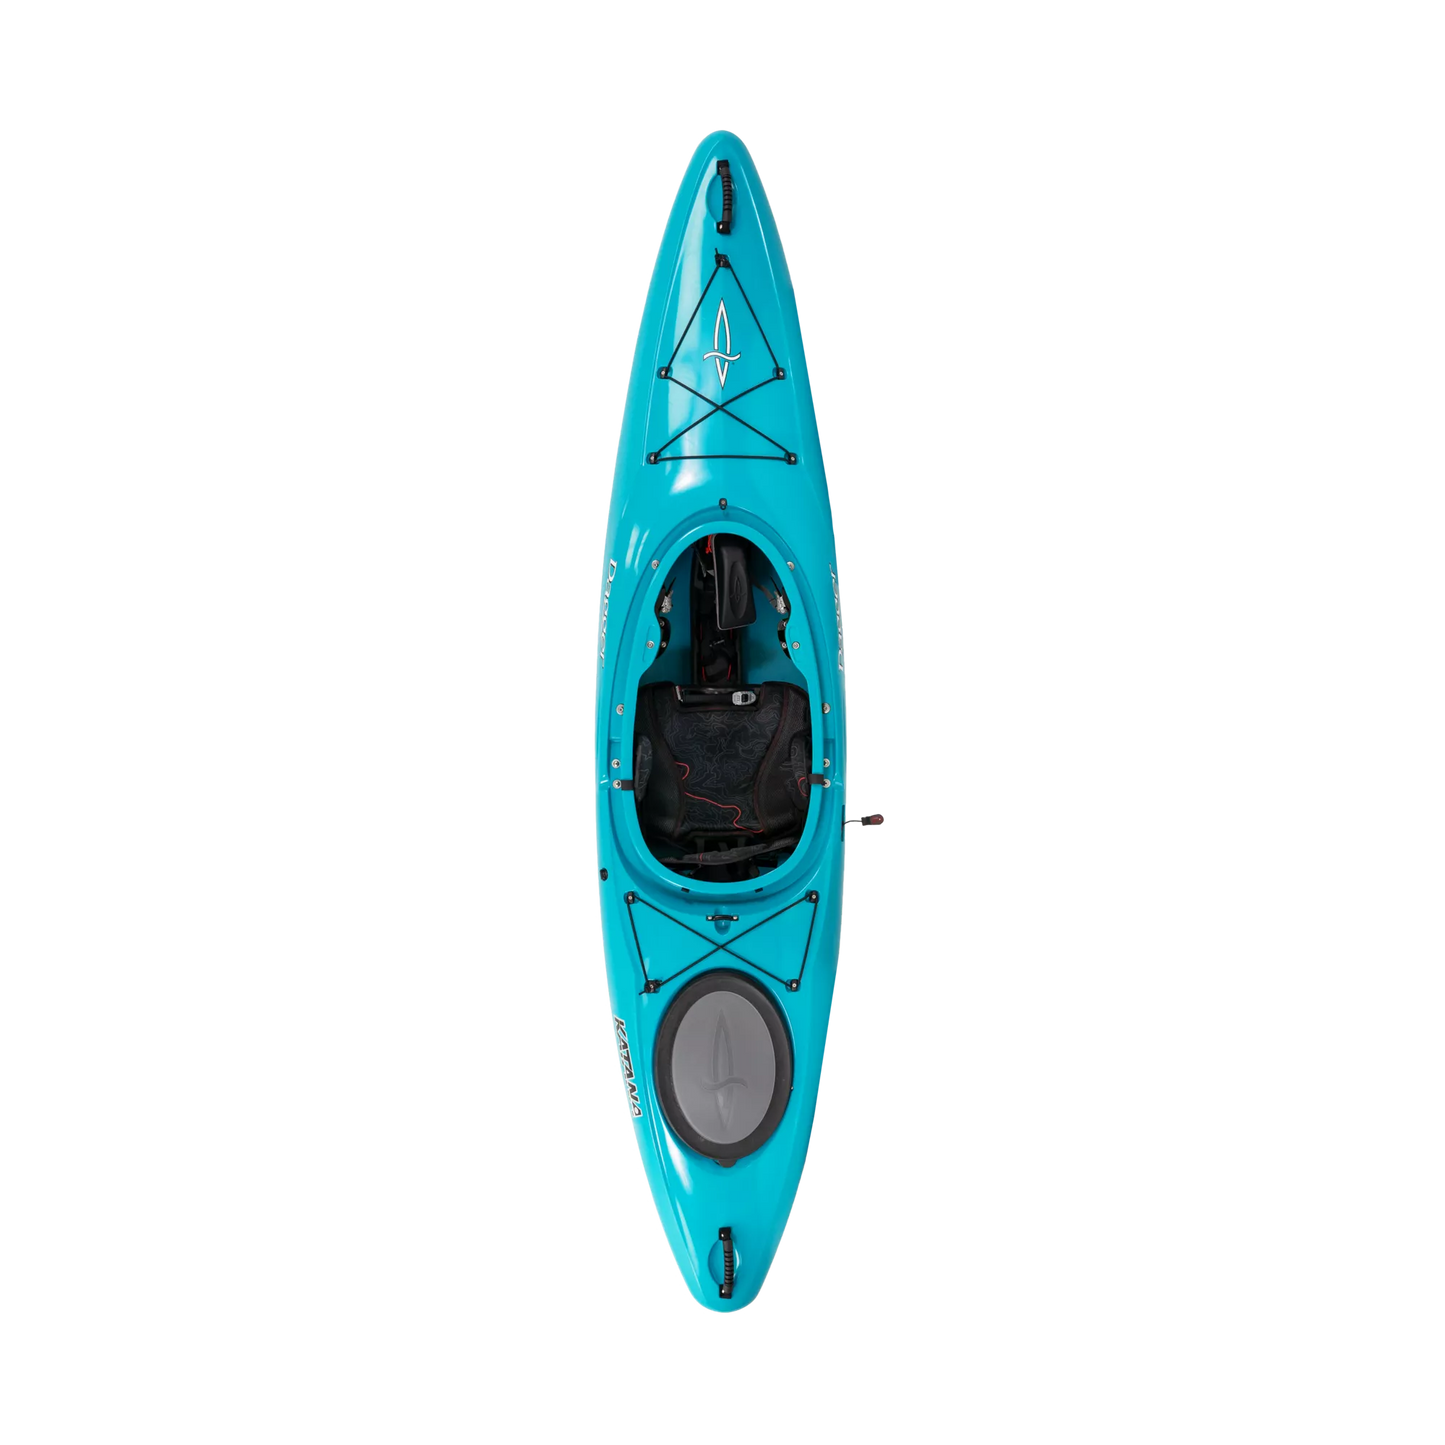 Top-down view of a turquoise Dagger Katana whitewater kayak on a black background with horizontal white lines indicating motion.